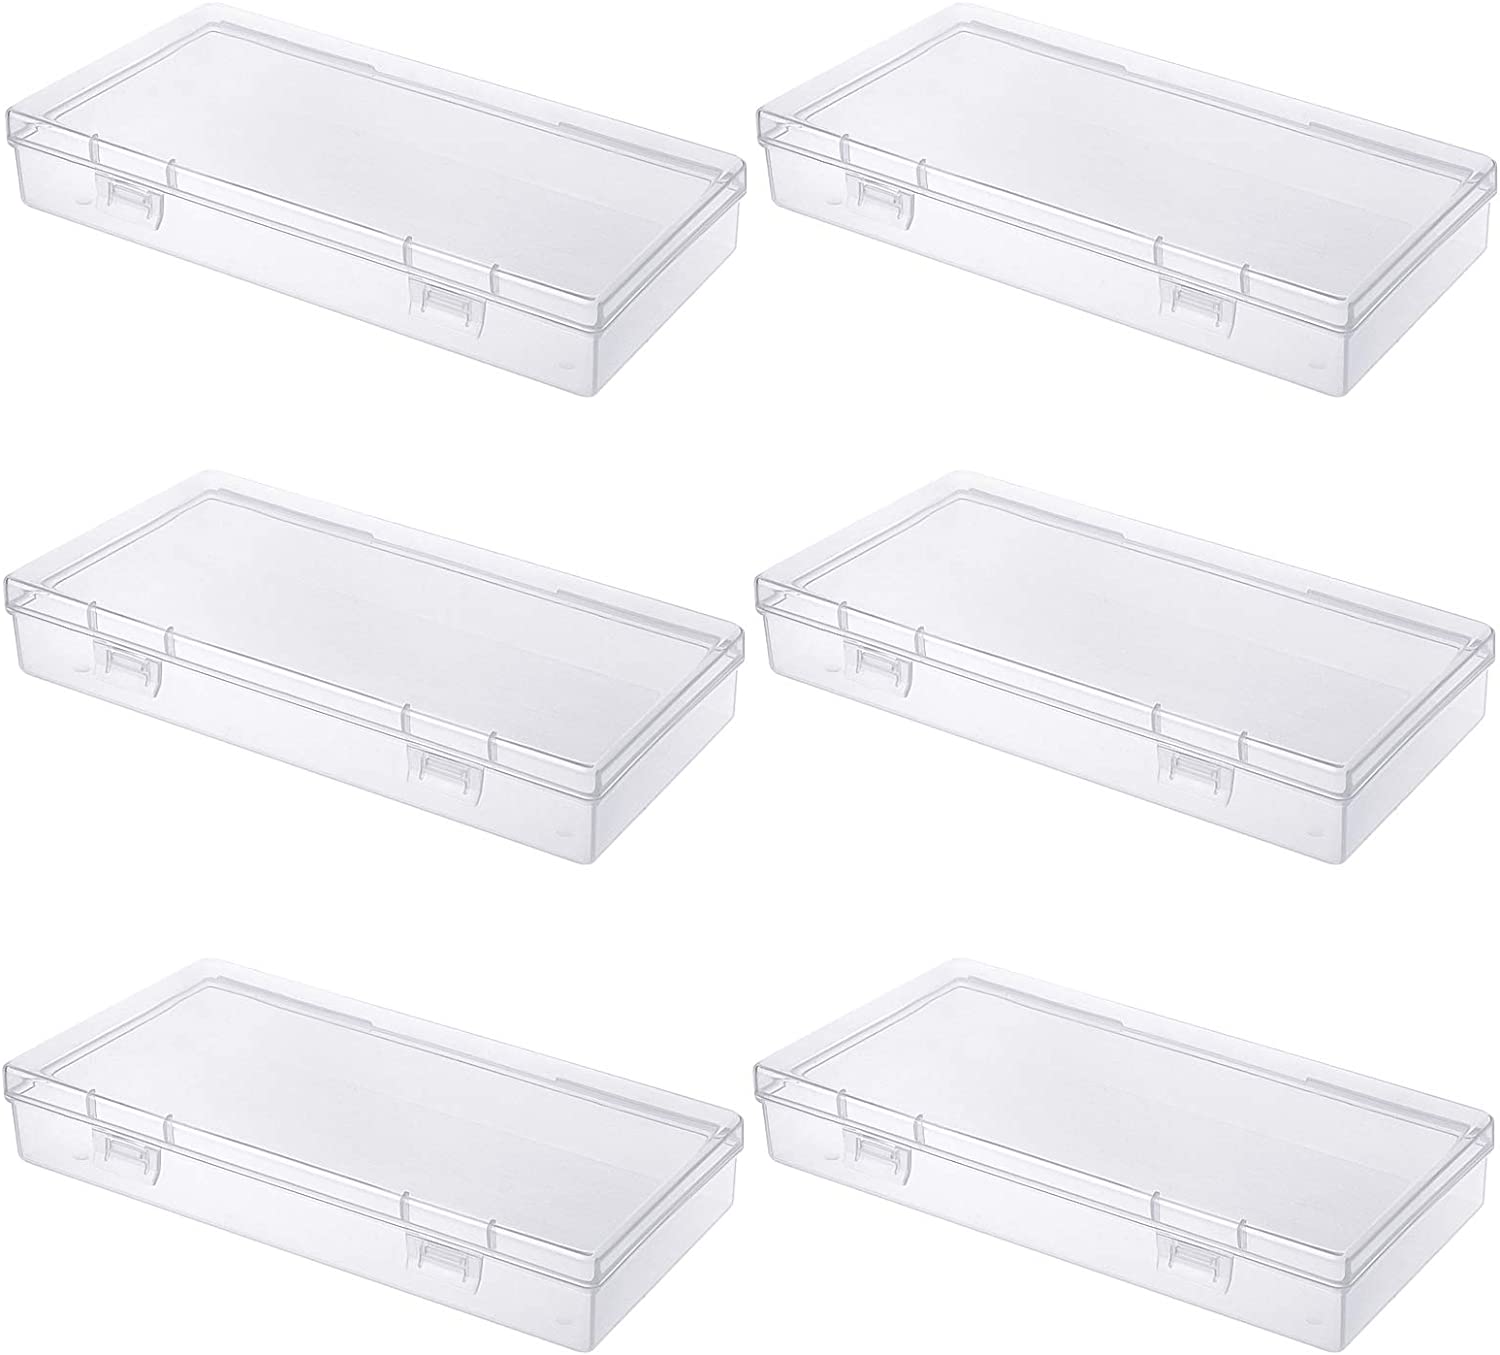  6Pack Small Plastic Clear Storage Box Containers with Lids,  Mini Bins (L5.3 x W3 x H2inches) - Reusable & Stackable Craft Box, Small  Items Accessories Storage Organizer for Beads, Jewelry, Crafting 